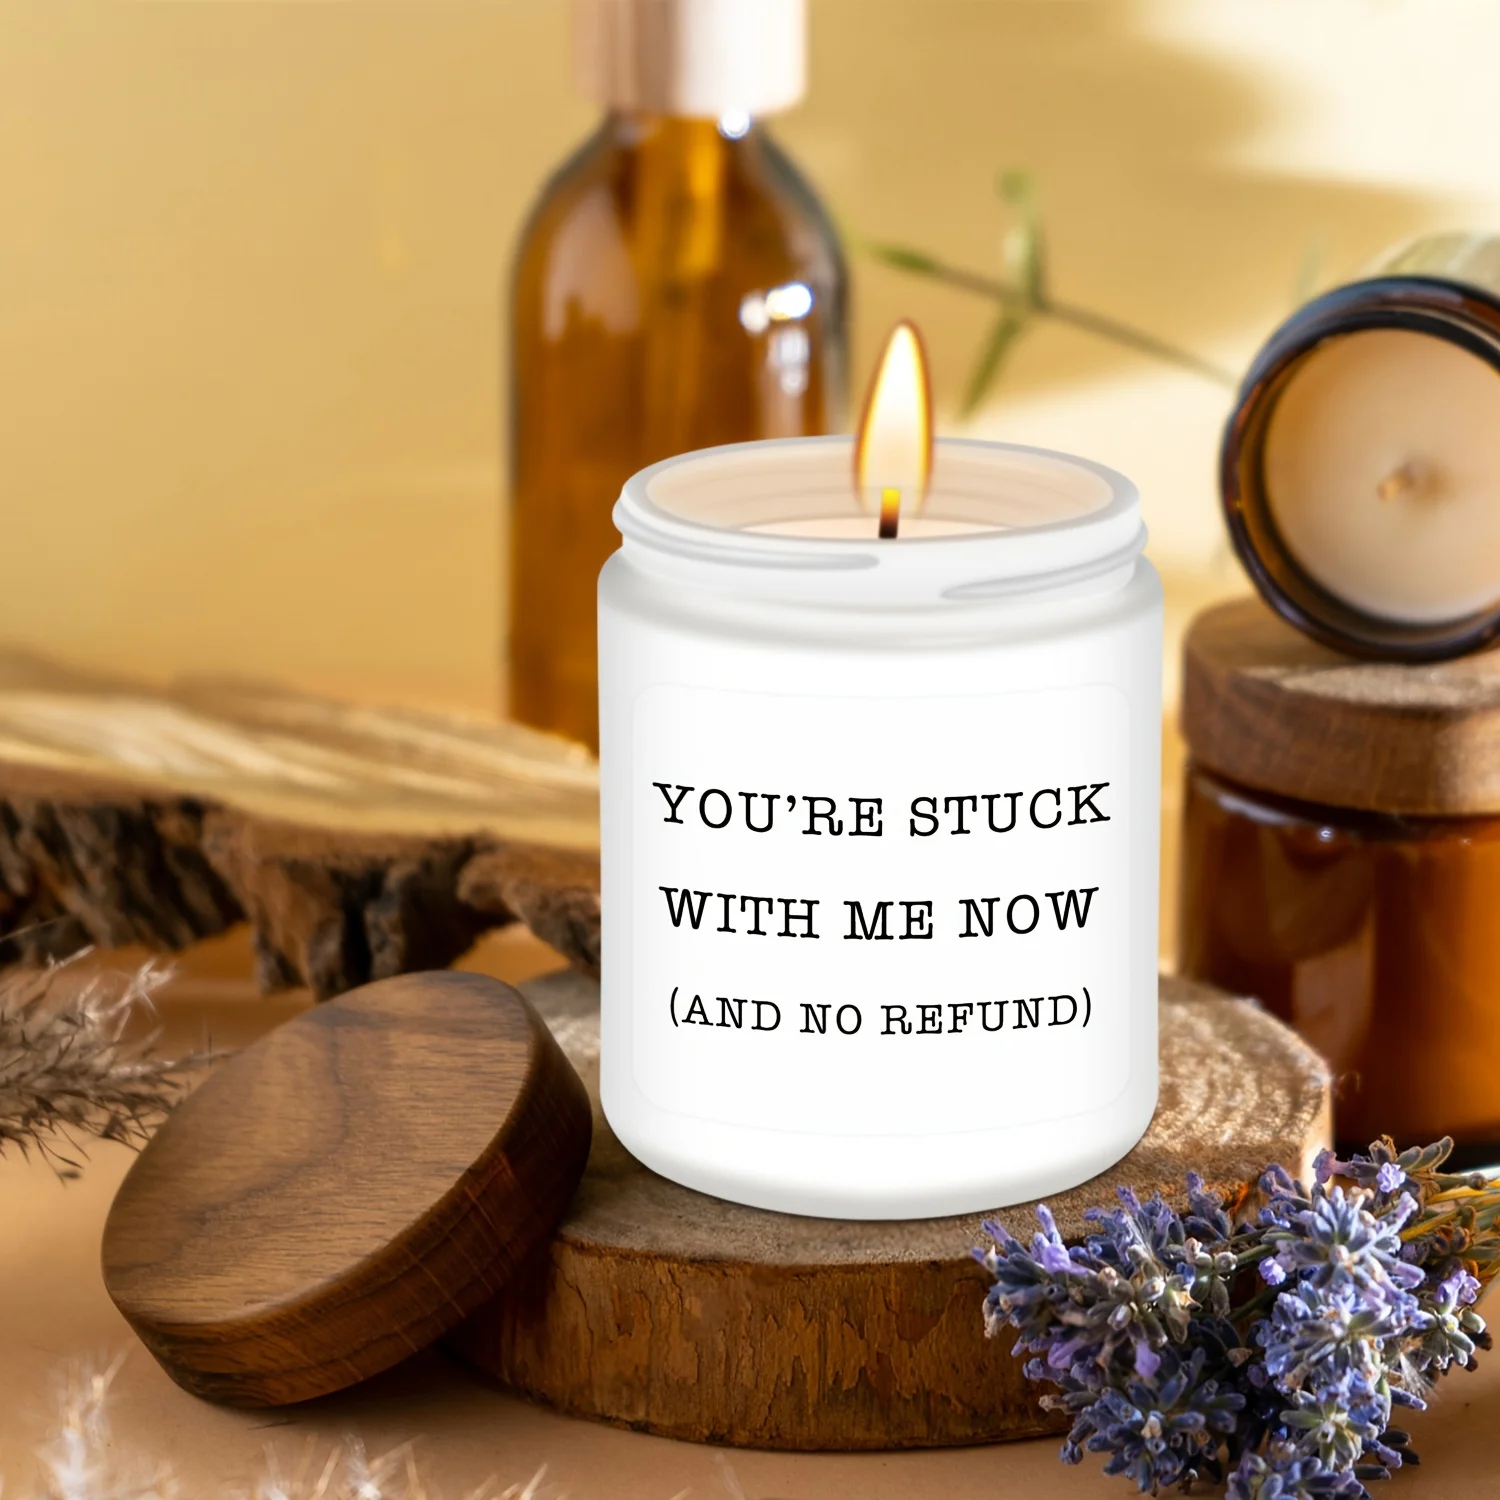 

1pc, Lavender Scented Candle Gift, Gift For Men Women, Valentine Day Christmas Gifts, Anniversary Romantic Birthday Gift For Him